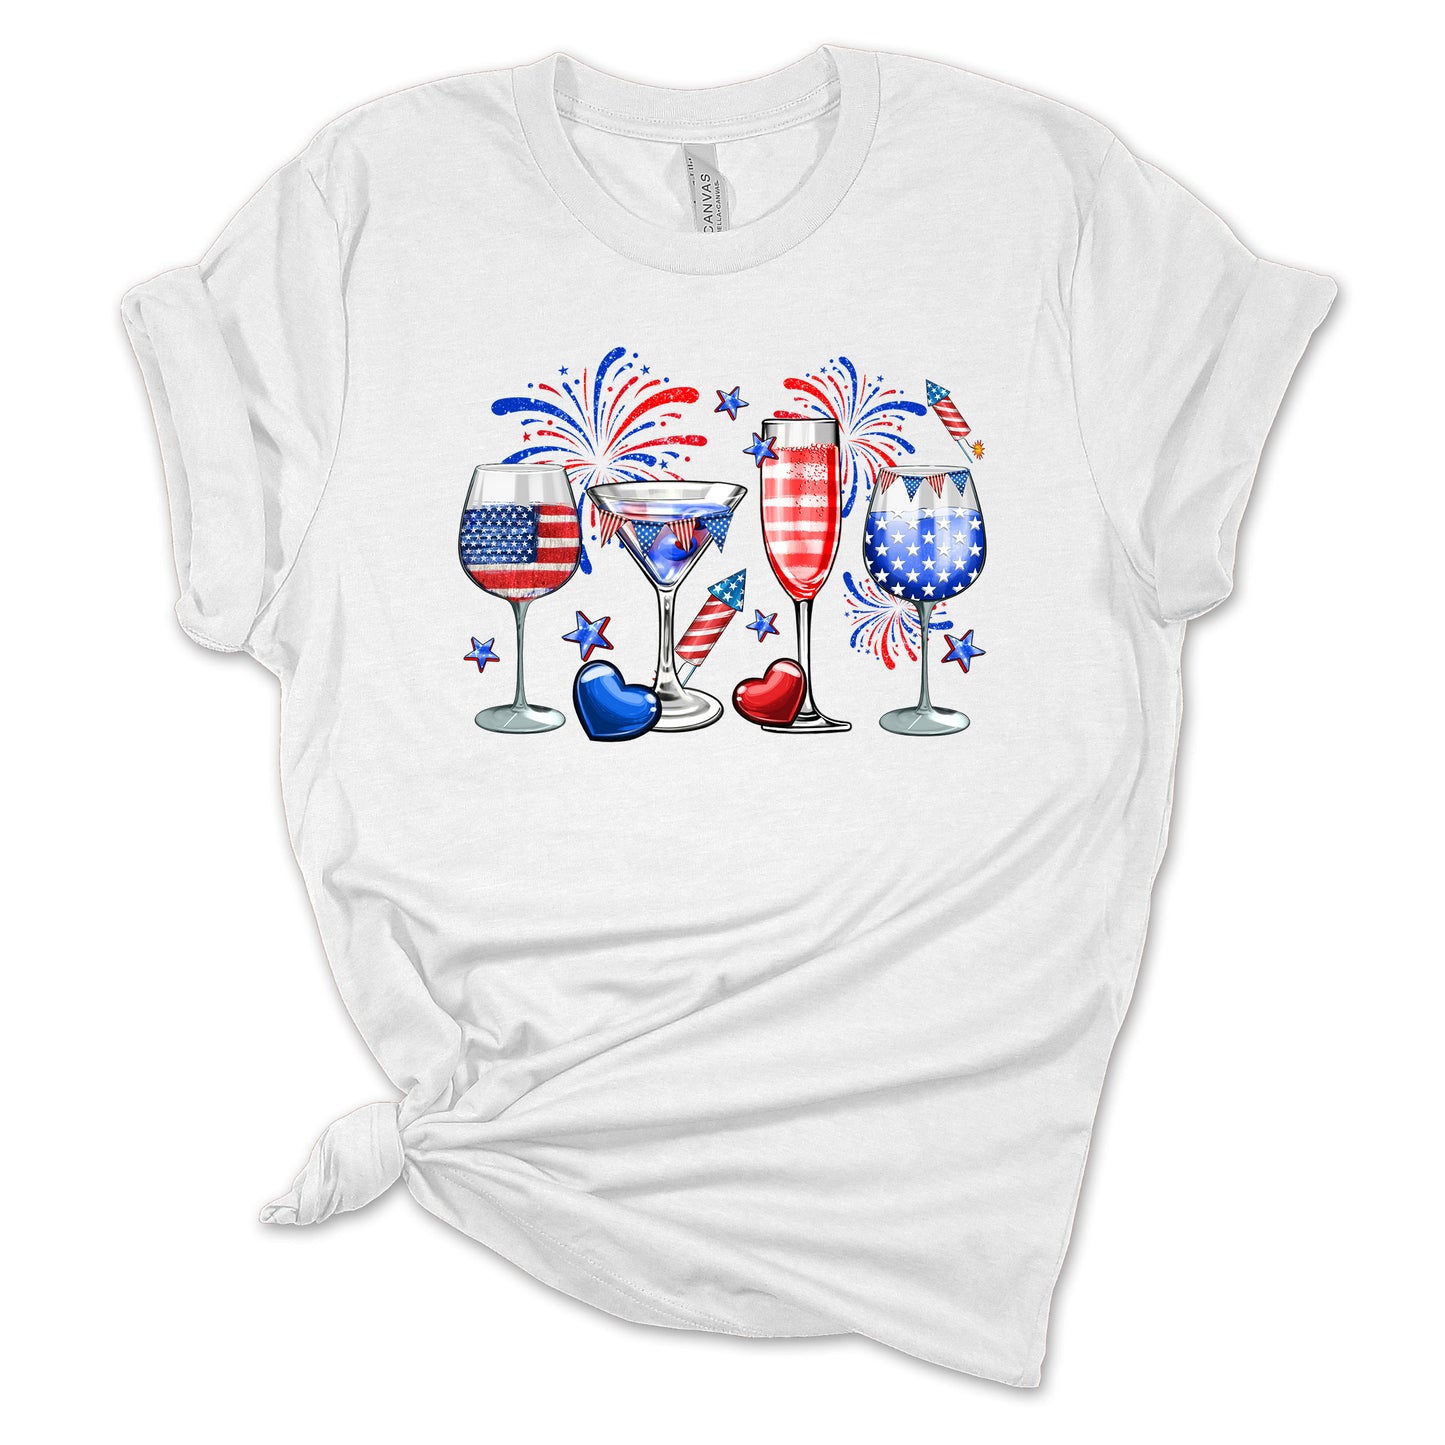 July 4th Celebration Drinking Shirt, Wine Lover Shirt, Martini Glass, Independence Day Party Shirt